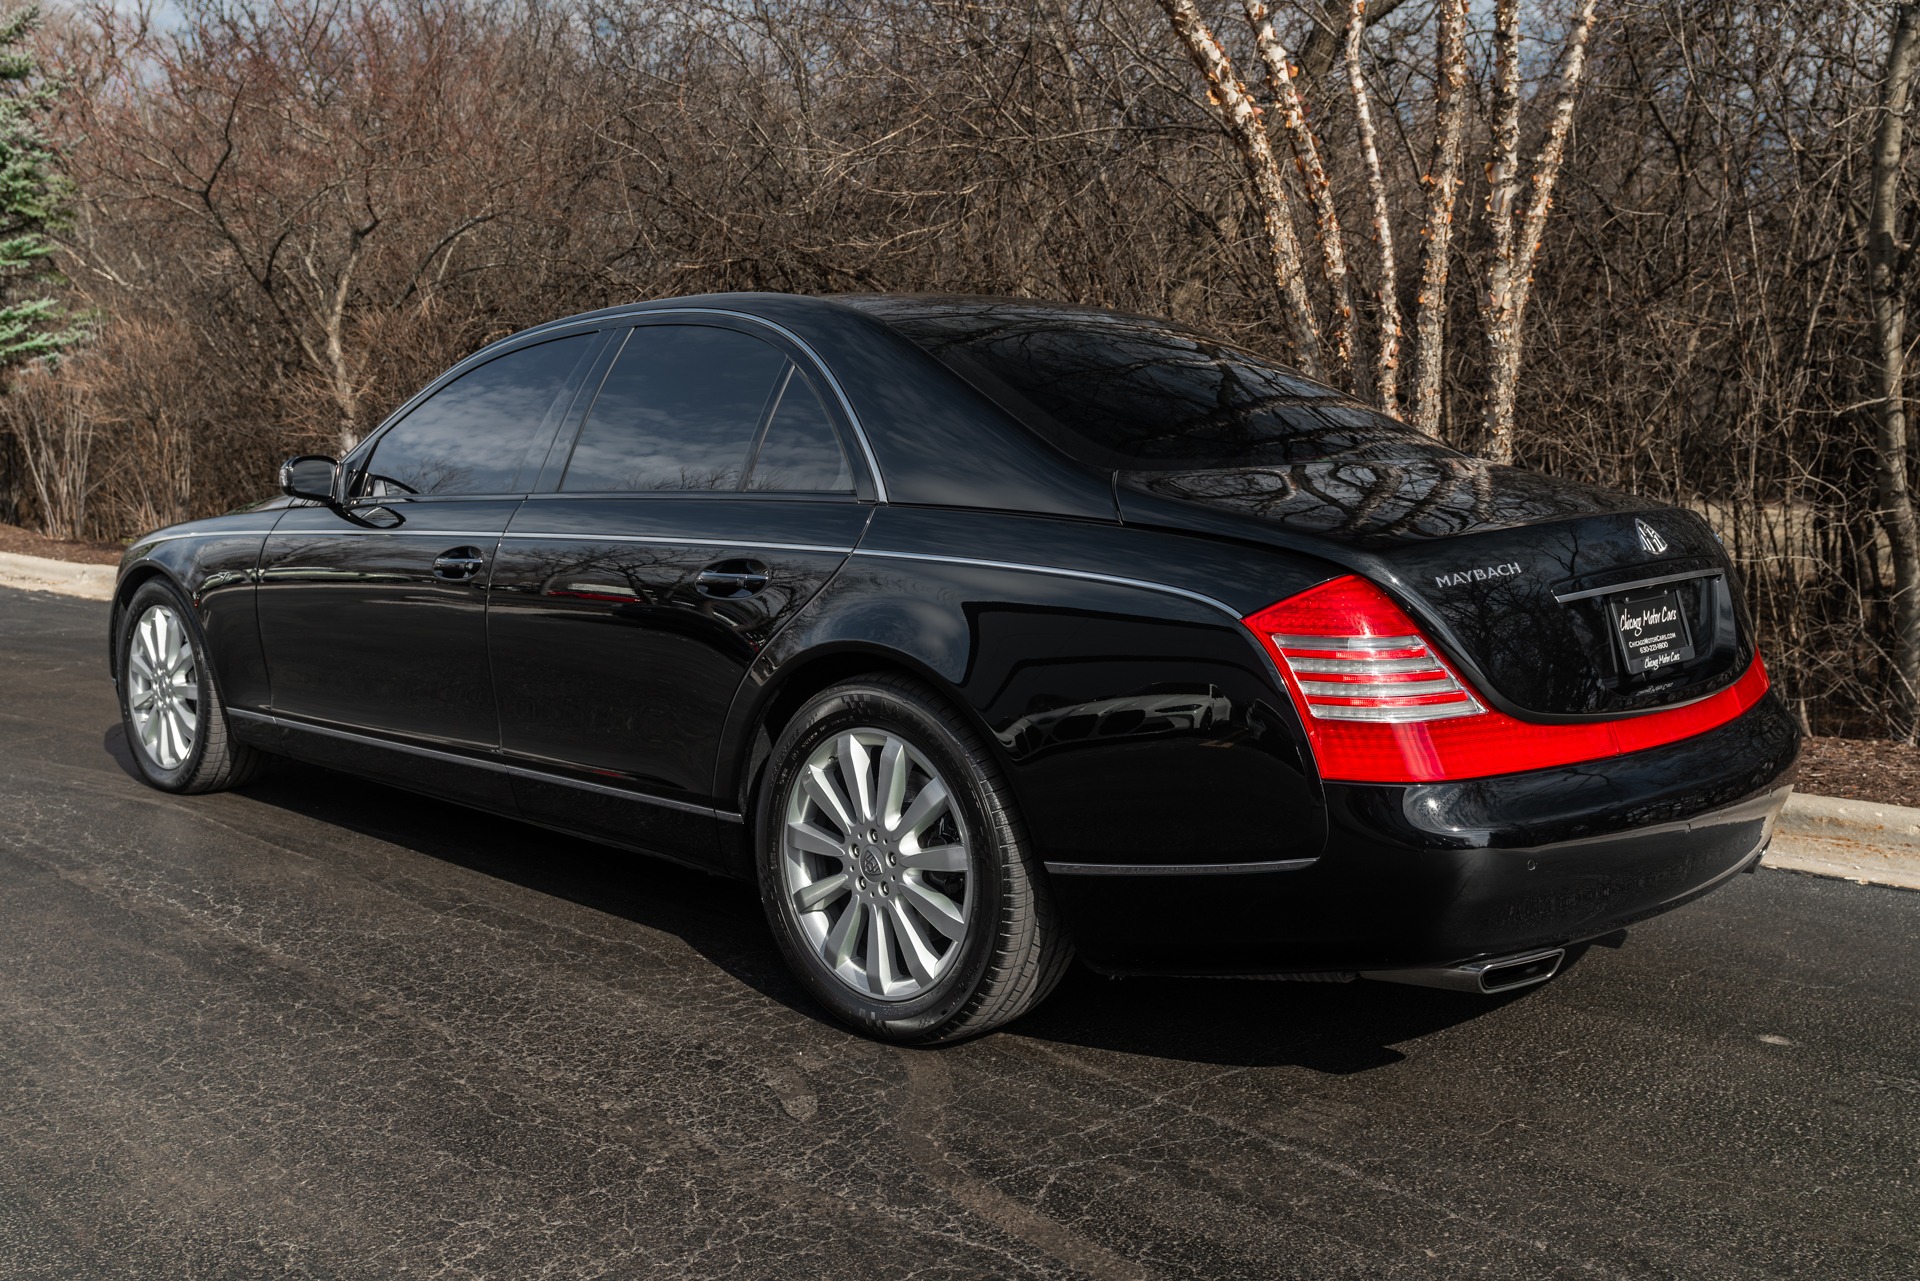 Used 2009 Maybach Maybach S with VIN WDBVF79J19A002449 for sale in West Chicago, IL